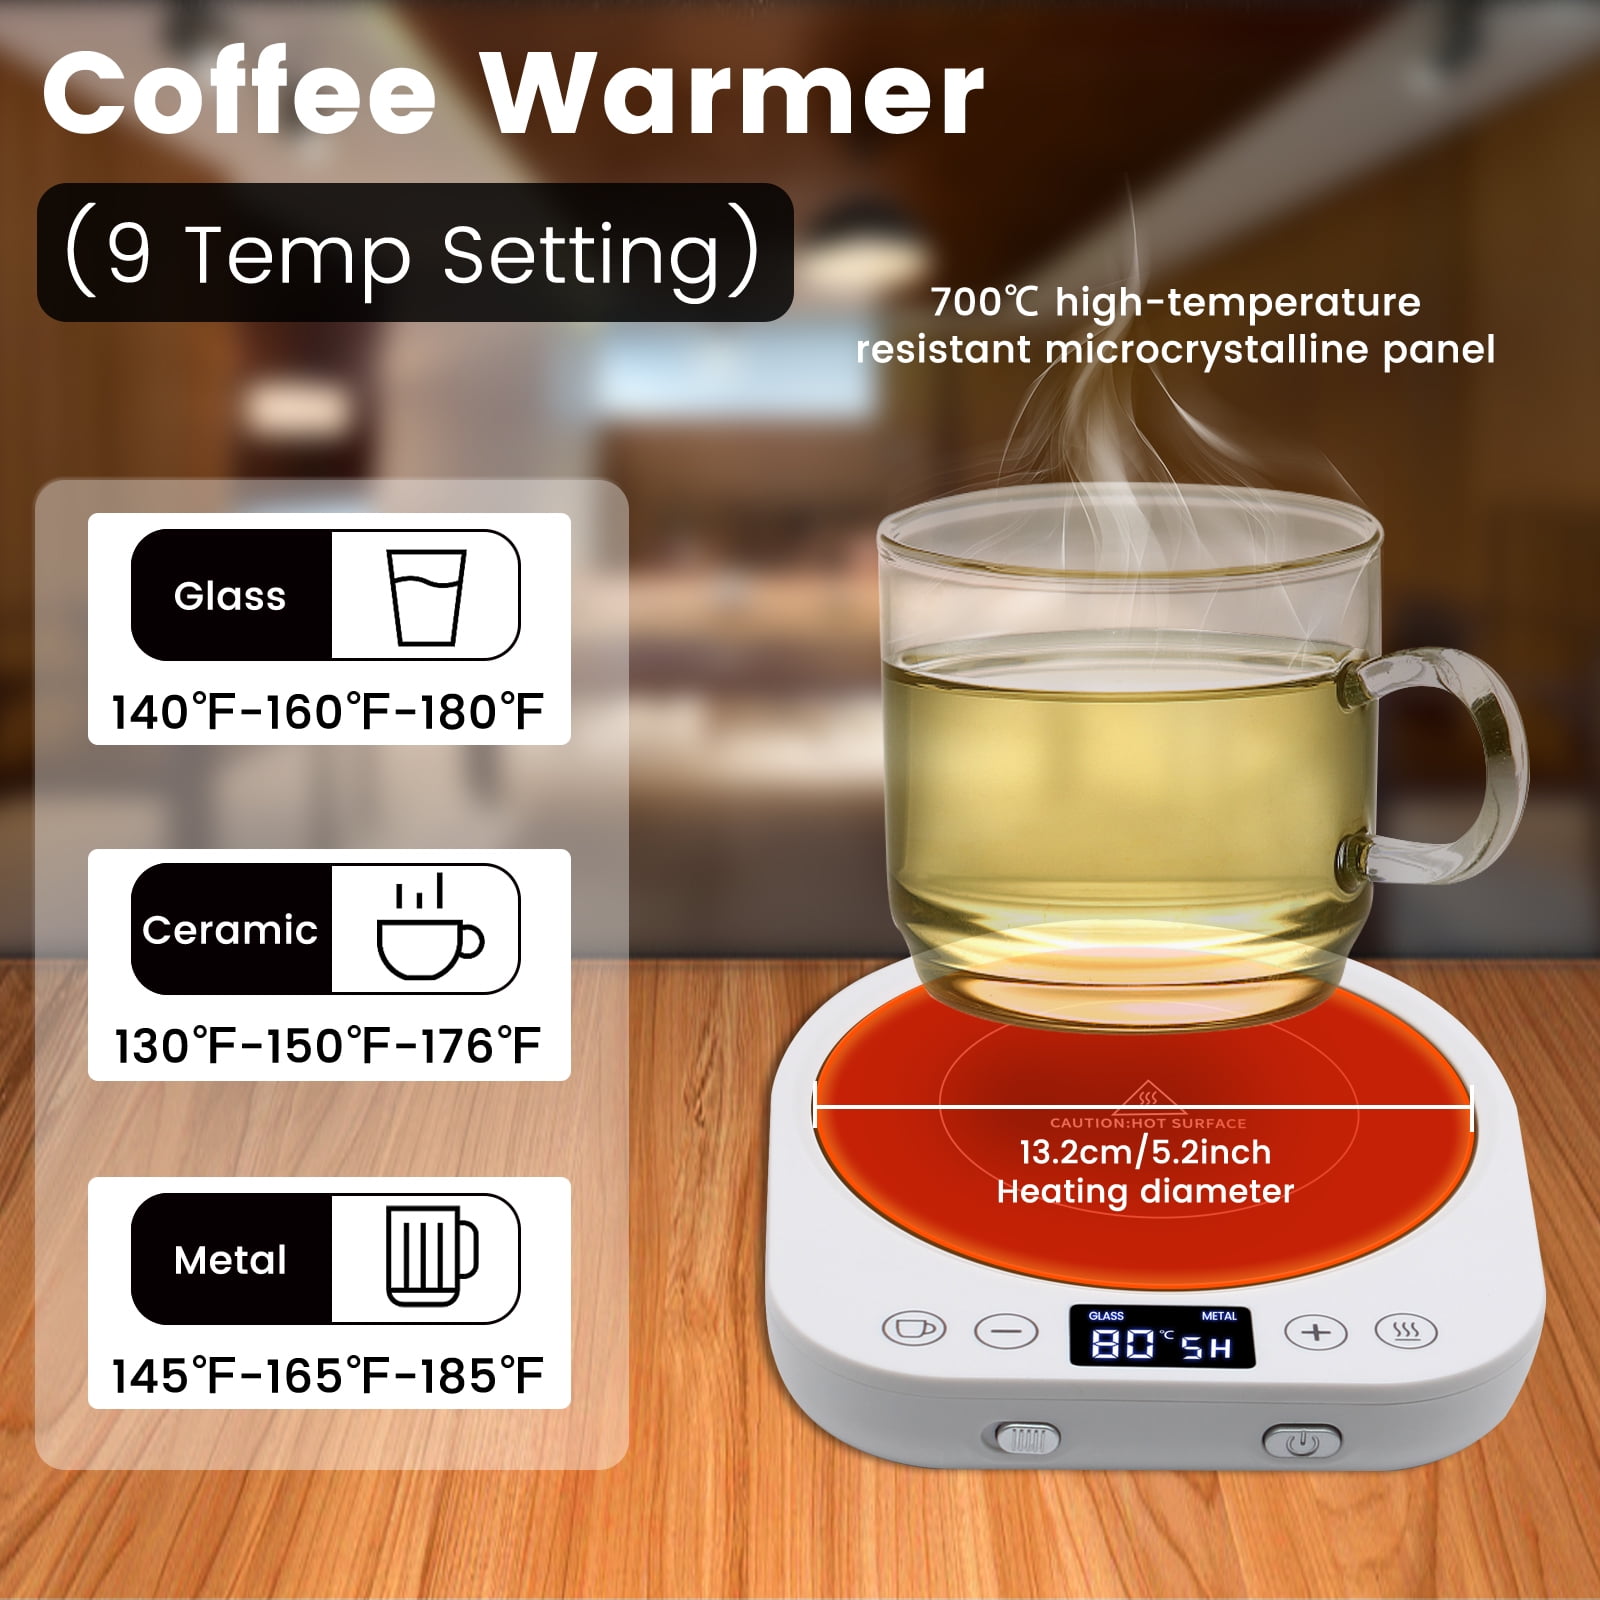 Dimux Coffee Mug Warmer Pressure-Activated, Auto On/Off Gravity-Induction Mug Warmer for Office Desk Use, Candle Wax Cup Warmer Heating Plat